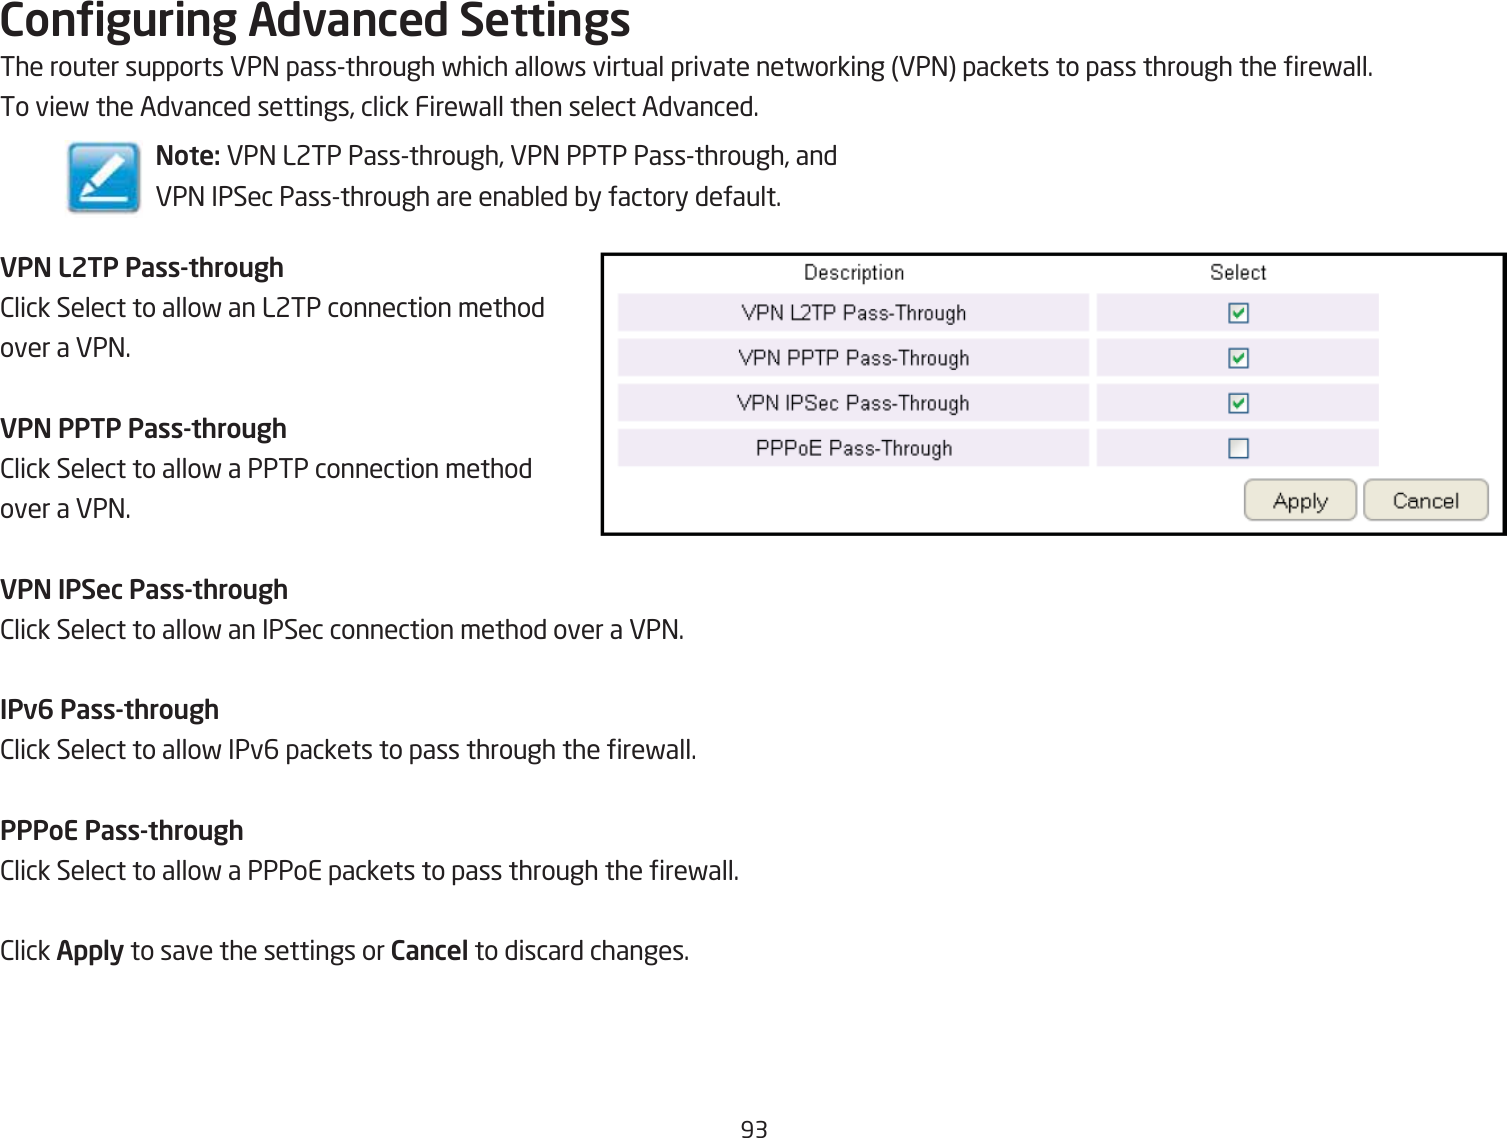 93Conguring Advanced SettingsThe router supports VP= passthrough fhich allofs virtual private netforking VP= packets to pass through the refall.To vief the Advanced settings, click Firefall then select Advanced.VPN L2TP Pass-through2lick Select to allof an L2TP connection method over a VP=.VPN PPTP Pass-through2lick Select to allof a PPTP connection method over a VP=.VPN IPSec Pass-through2lick Select to allof an IPSec connection method over a VP=.IPv6 Pass-through2lick Select to allof IPv6 packets to pass through the refall.PPPoE Pass-through2lick Select to allof a PPPoE packets to pass through the refall.2lick Apply to save the settings or Cancel to discard changes.Note: VP= L2TP Passthrough, VP= PPTP Passthrough, andVP= IPSec Passthrough are enaQled Qy factory default.